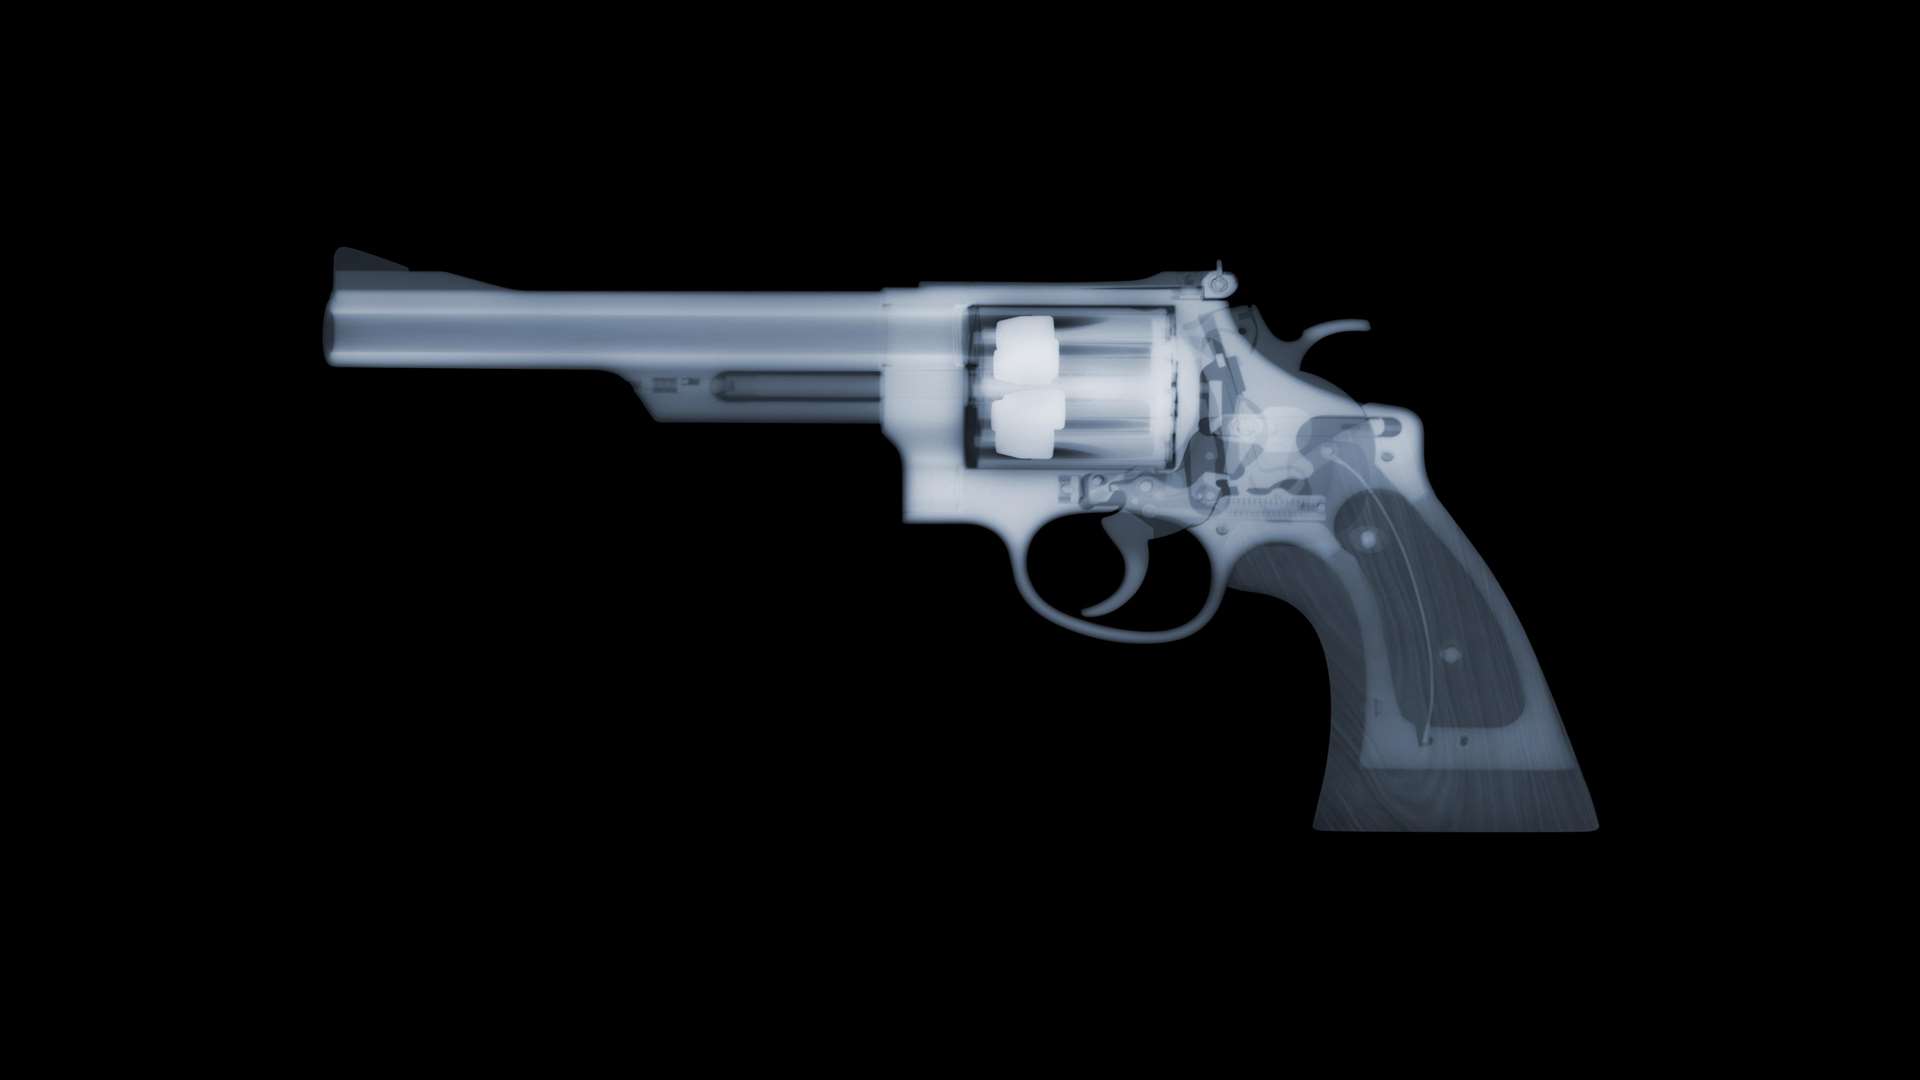 X-ray of a magnum, like the one Clint Eastwood wielded in the Dirty Harry films